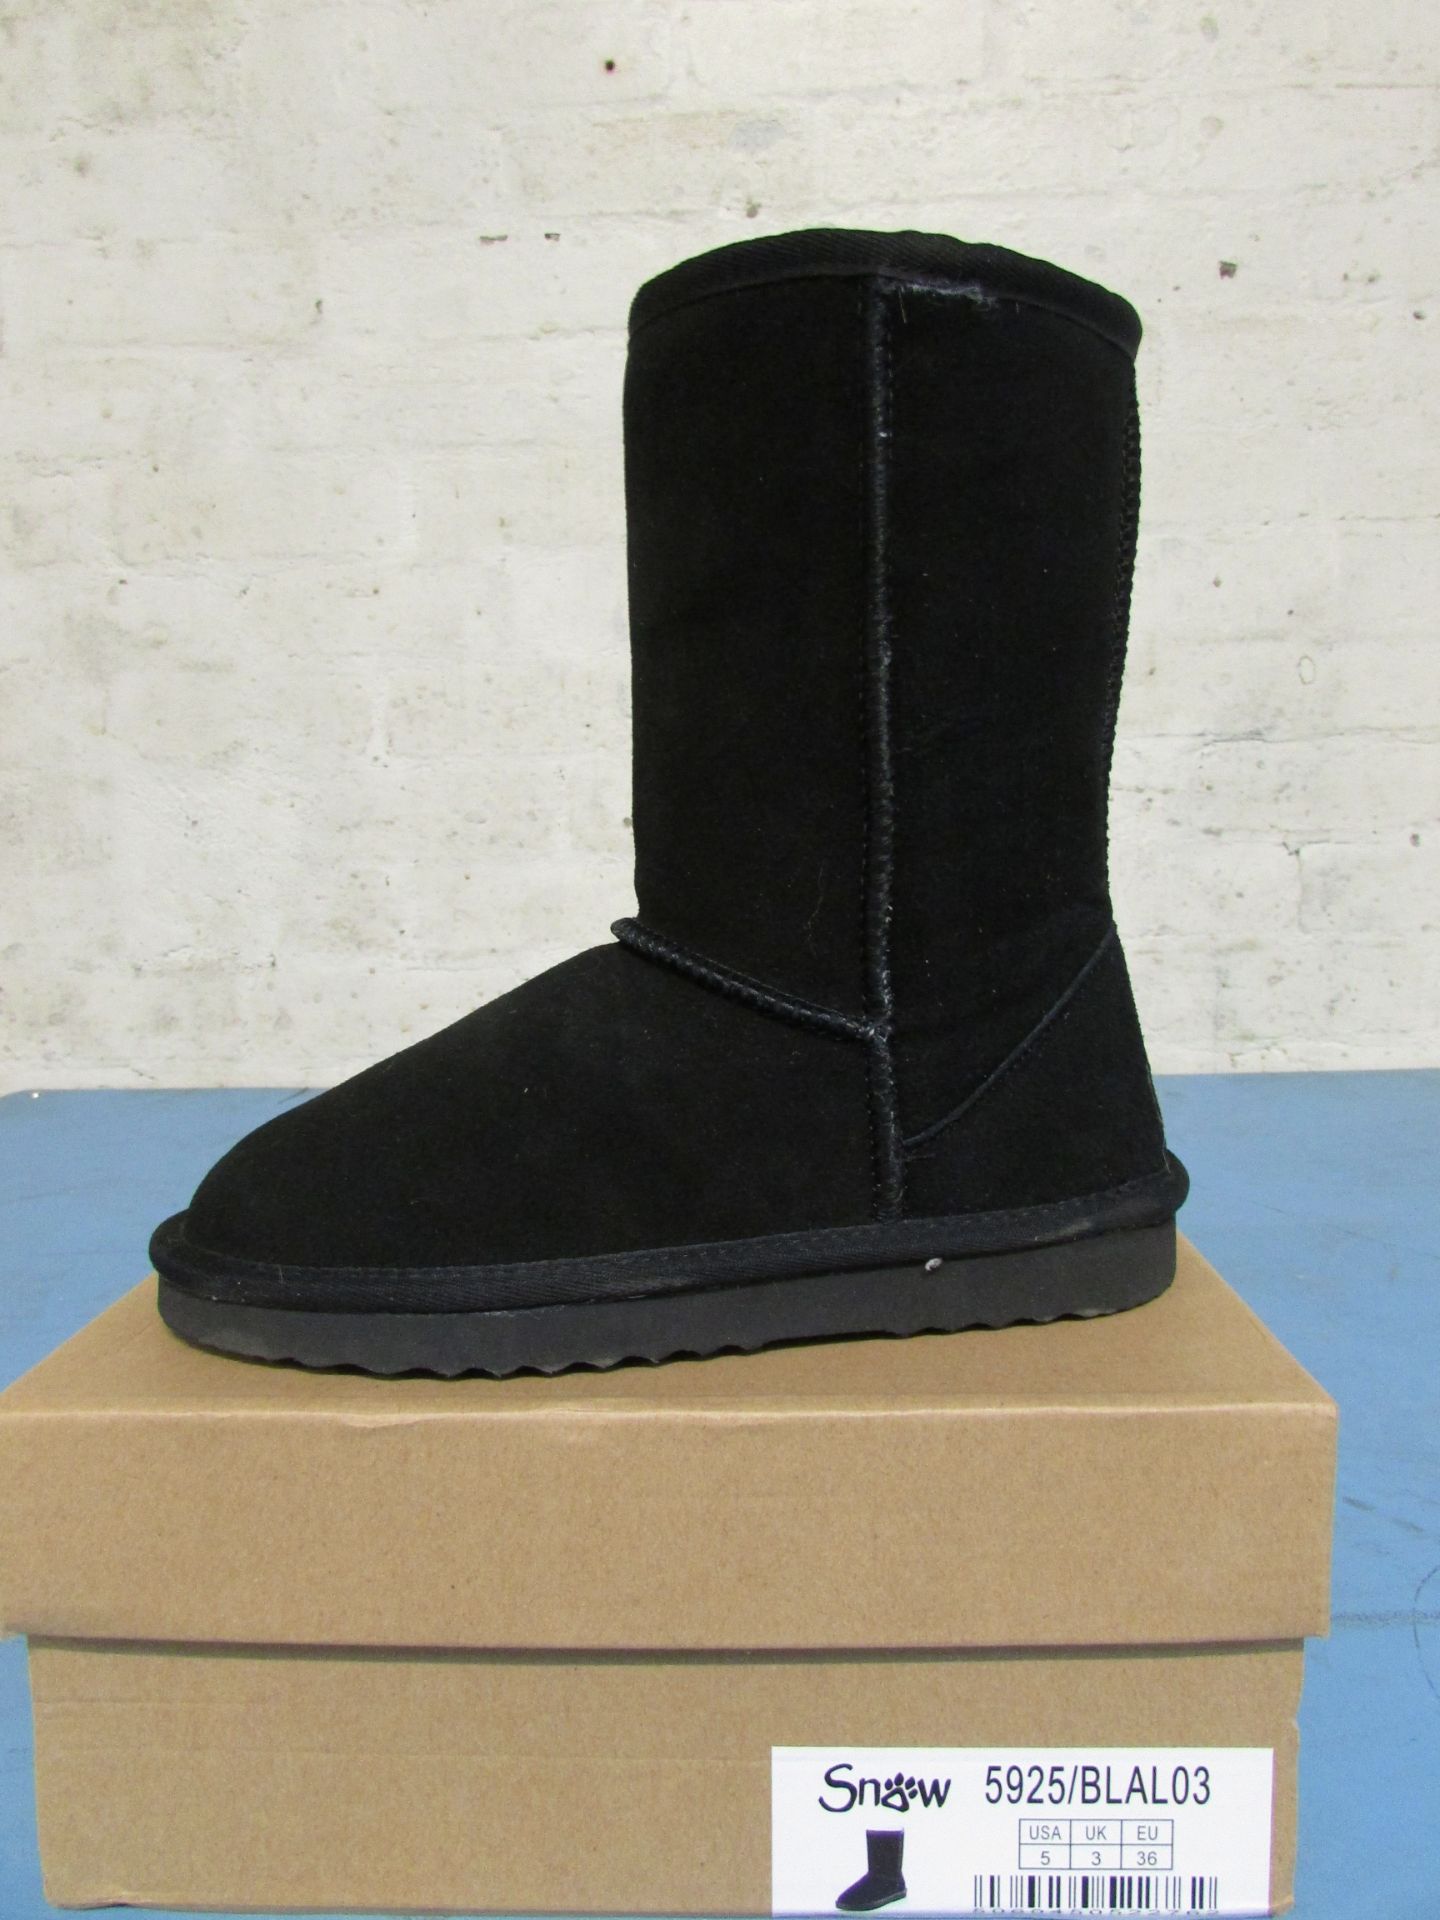 SNOW PAW BOOT IN BLACK UK SIZE 3